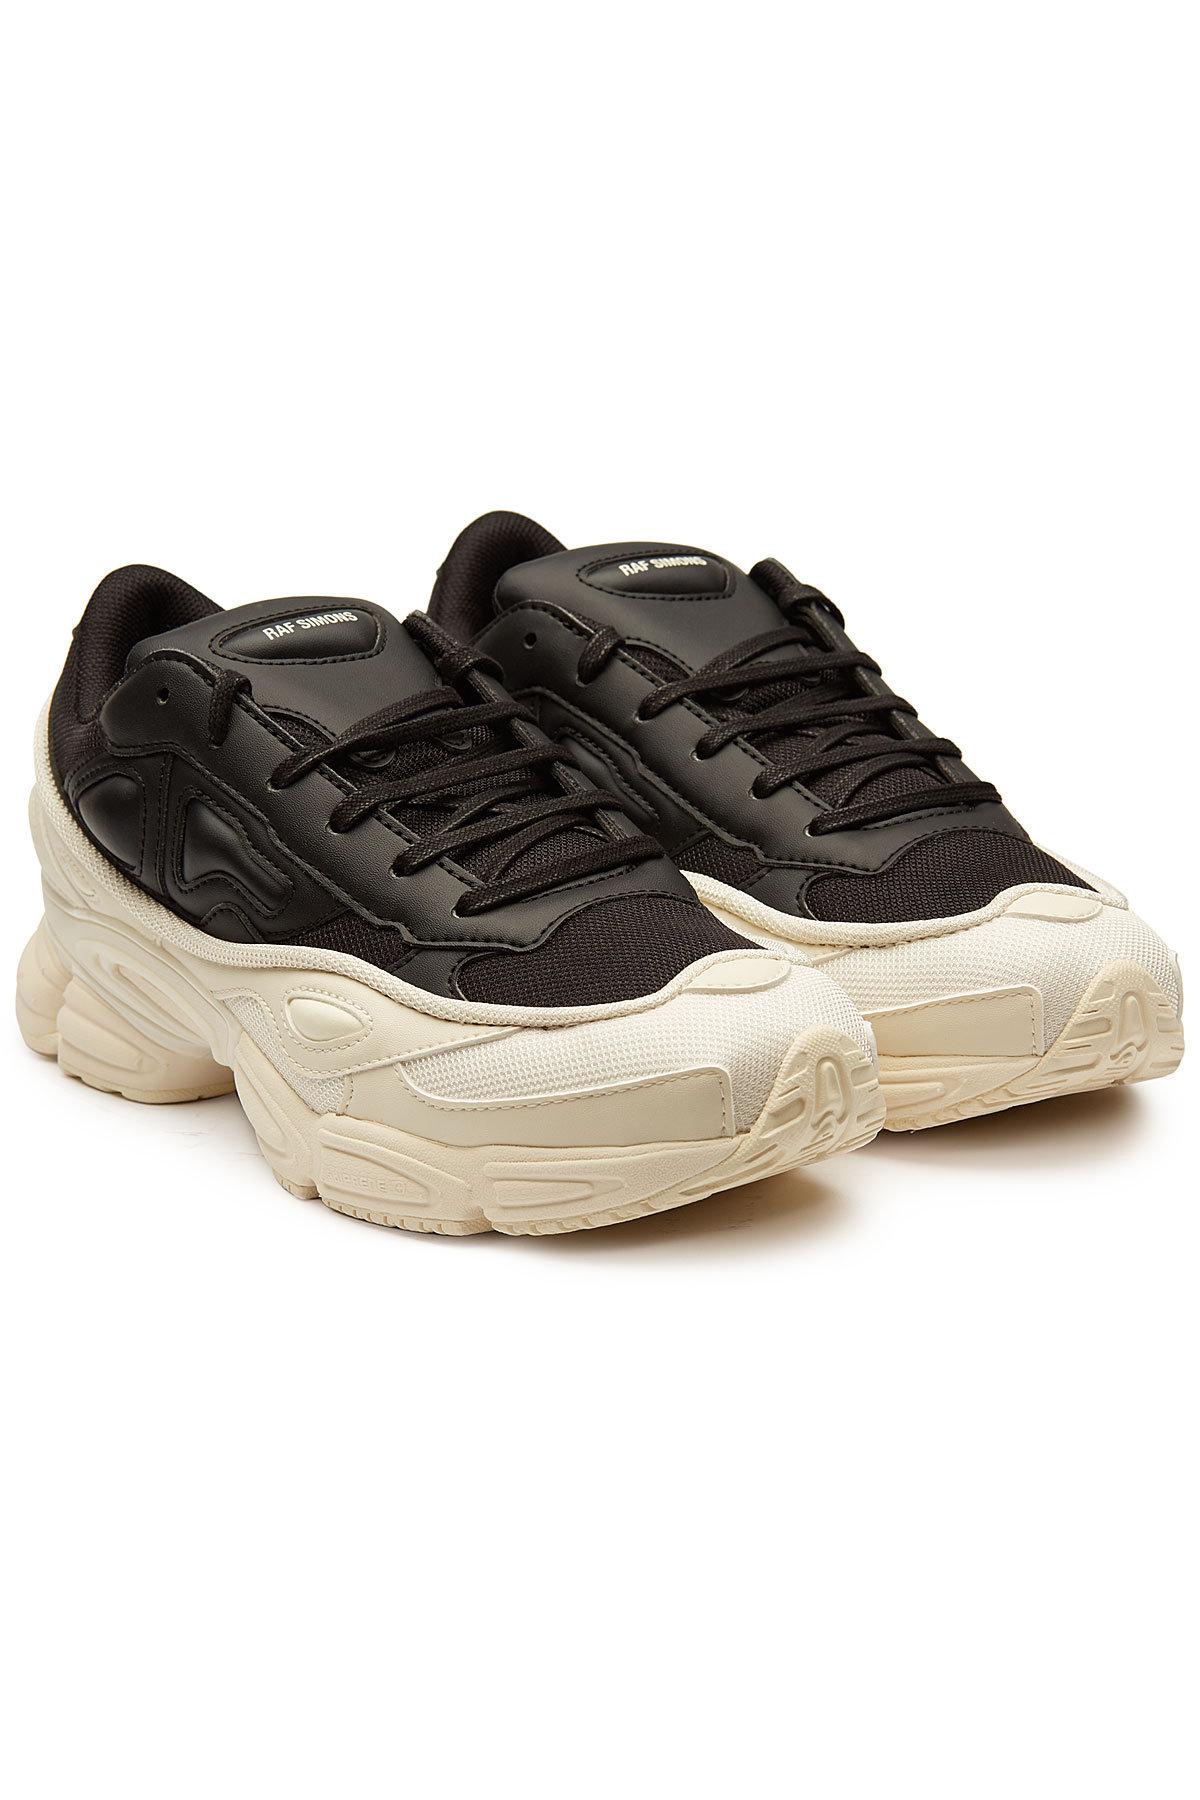 Adidas By Raf Simons Rs Ozweego Sneakers In Black | ModeSens